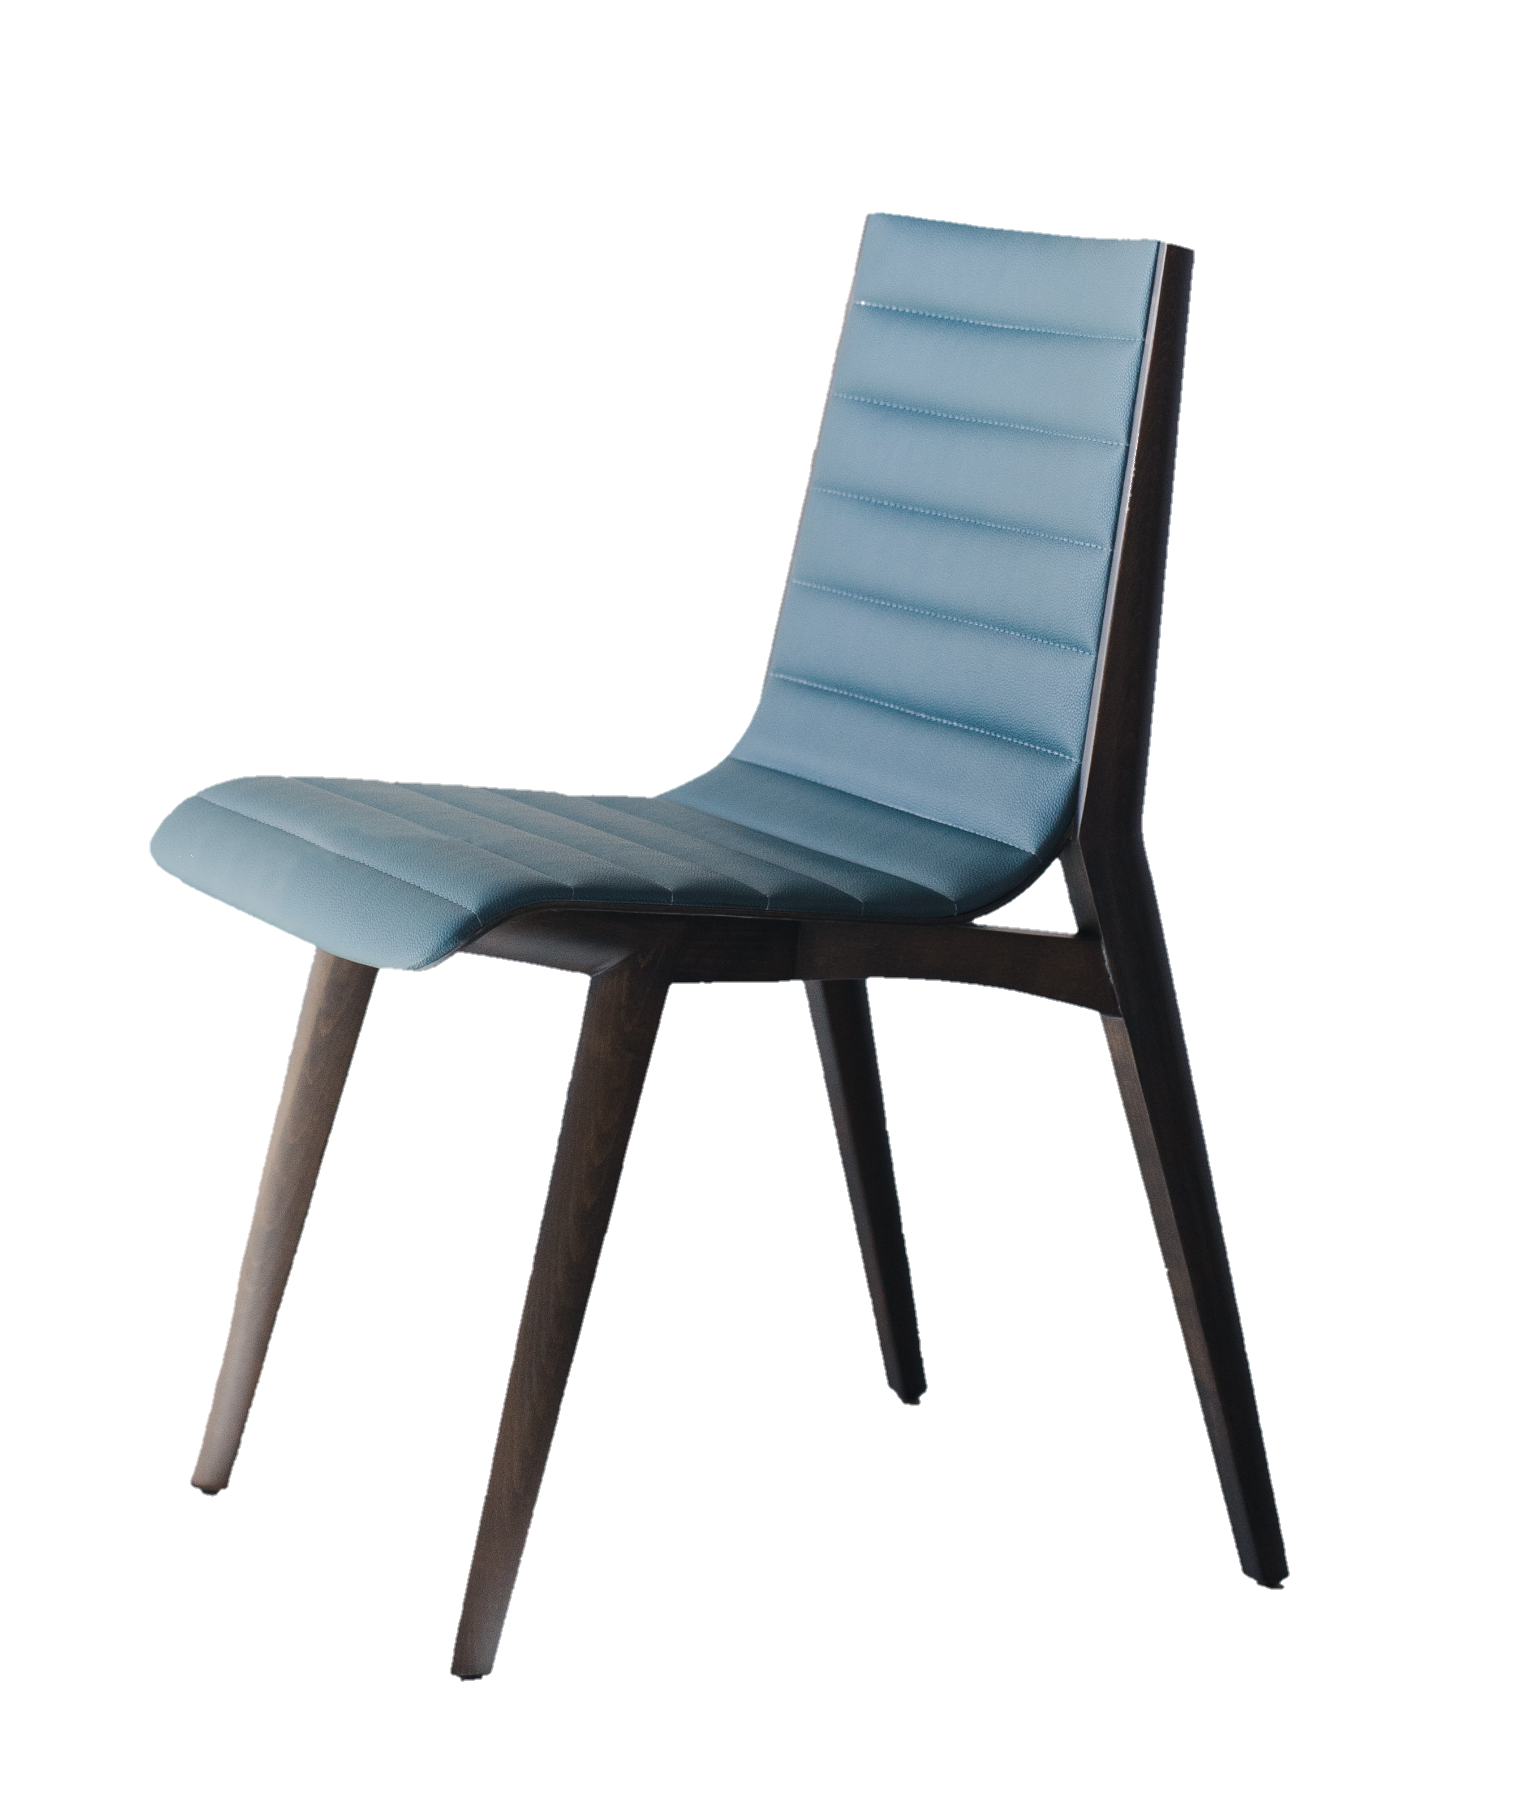 chair-png-image-pngfre-5